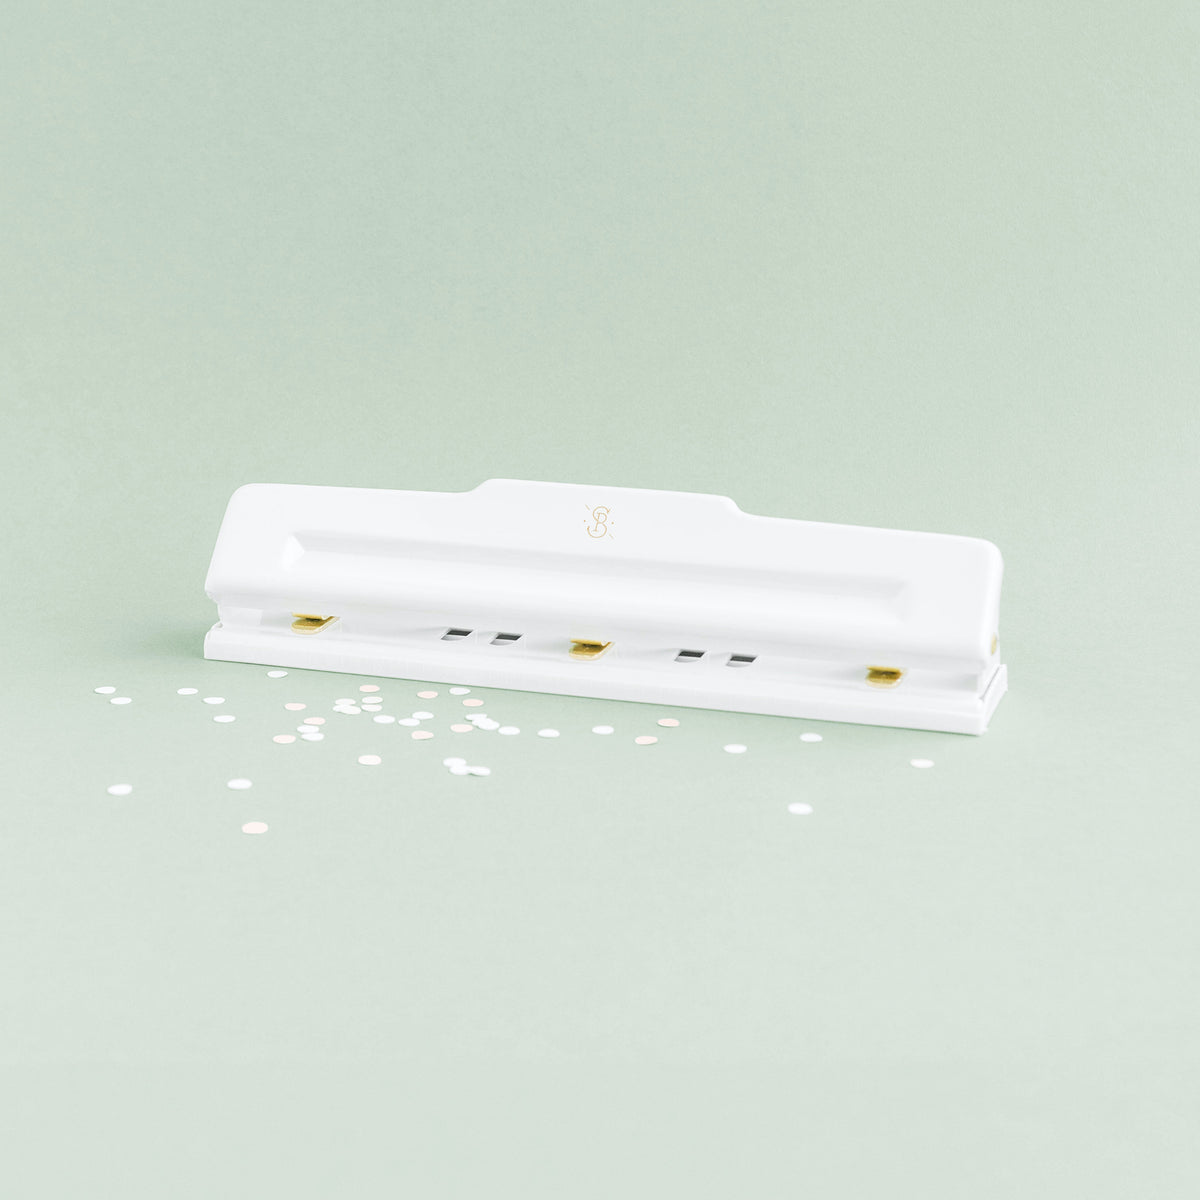 white 3-hole-punch with scattered punched holes on green background